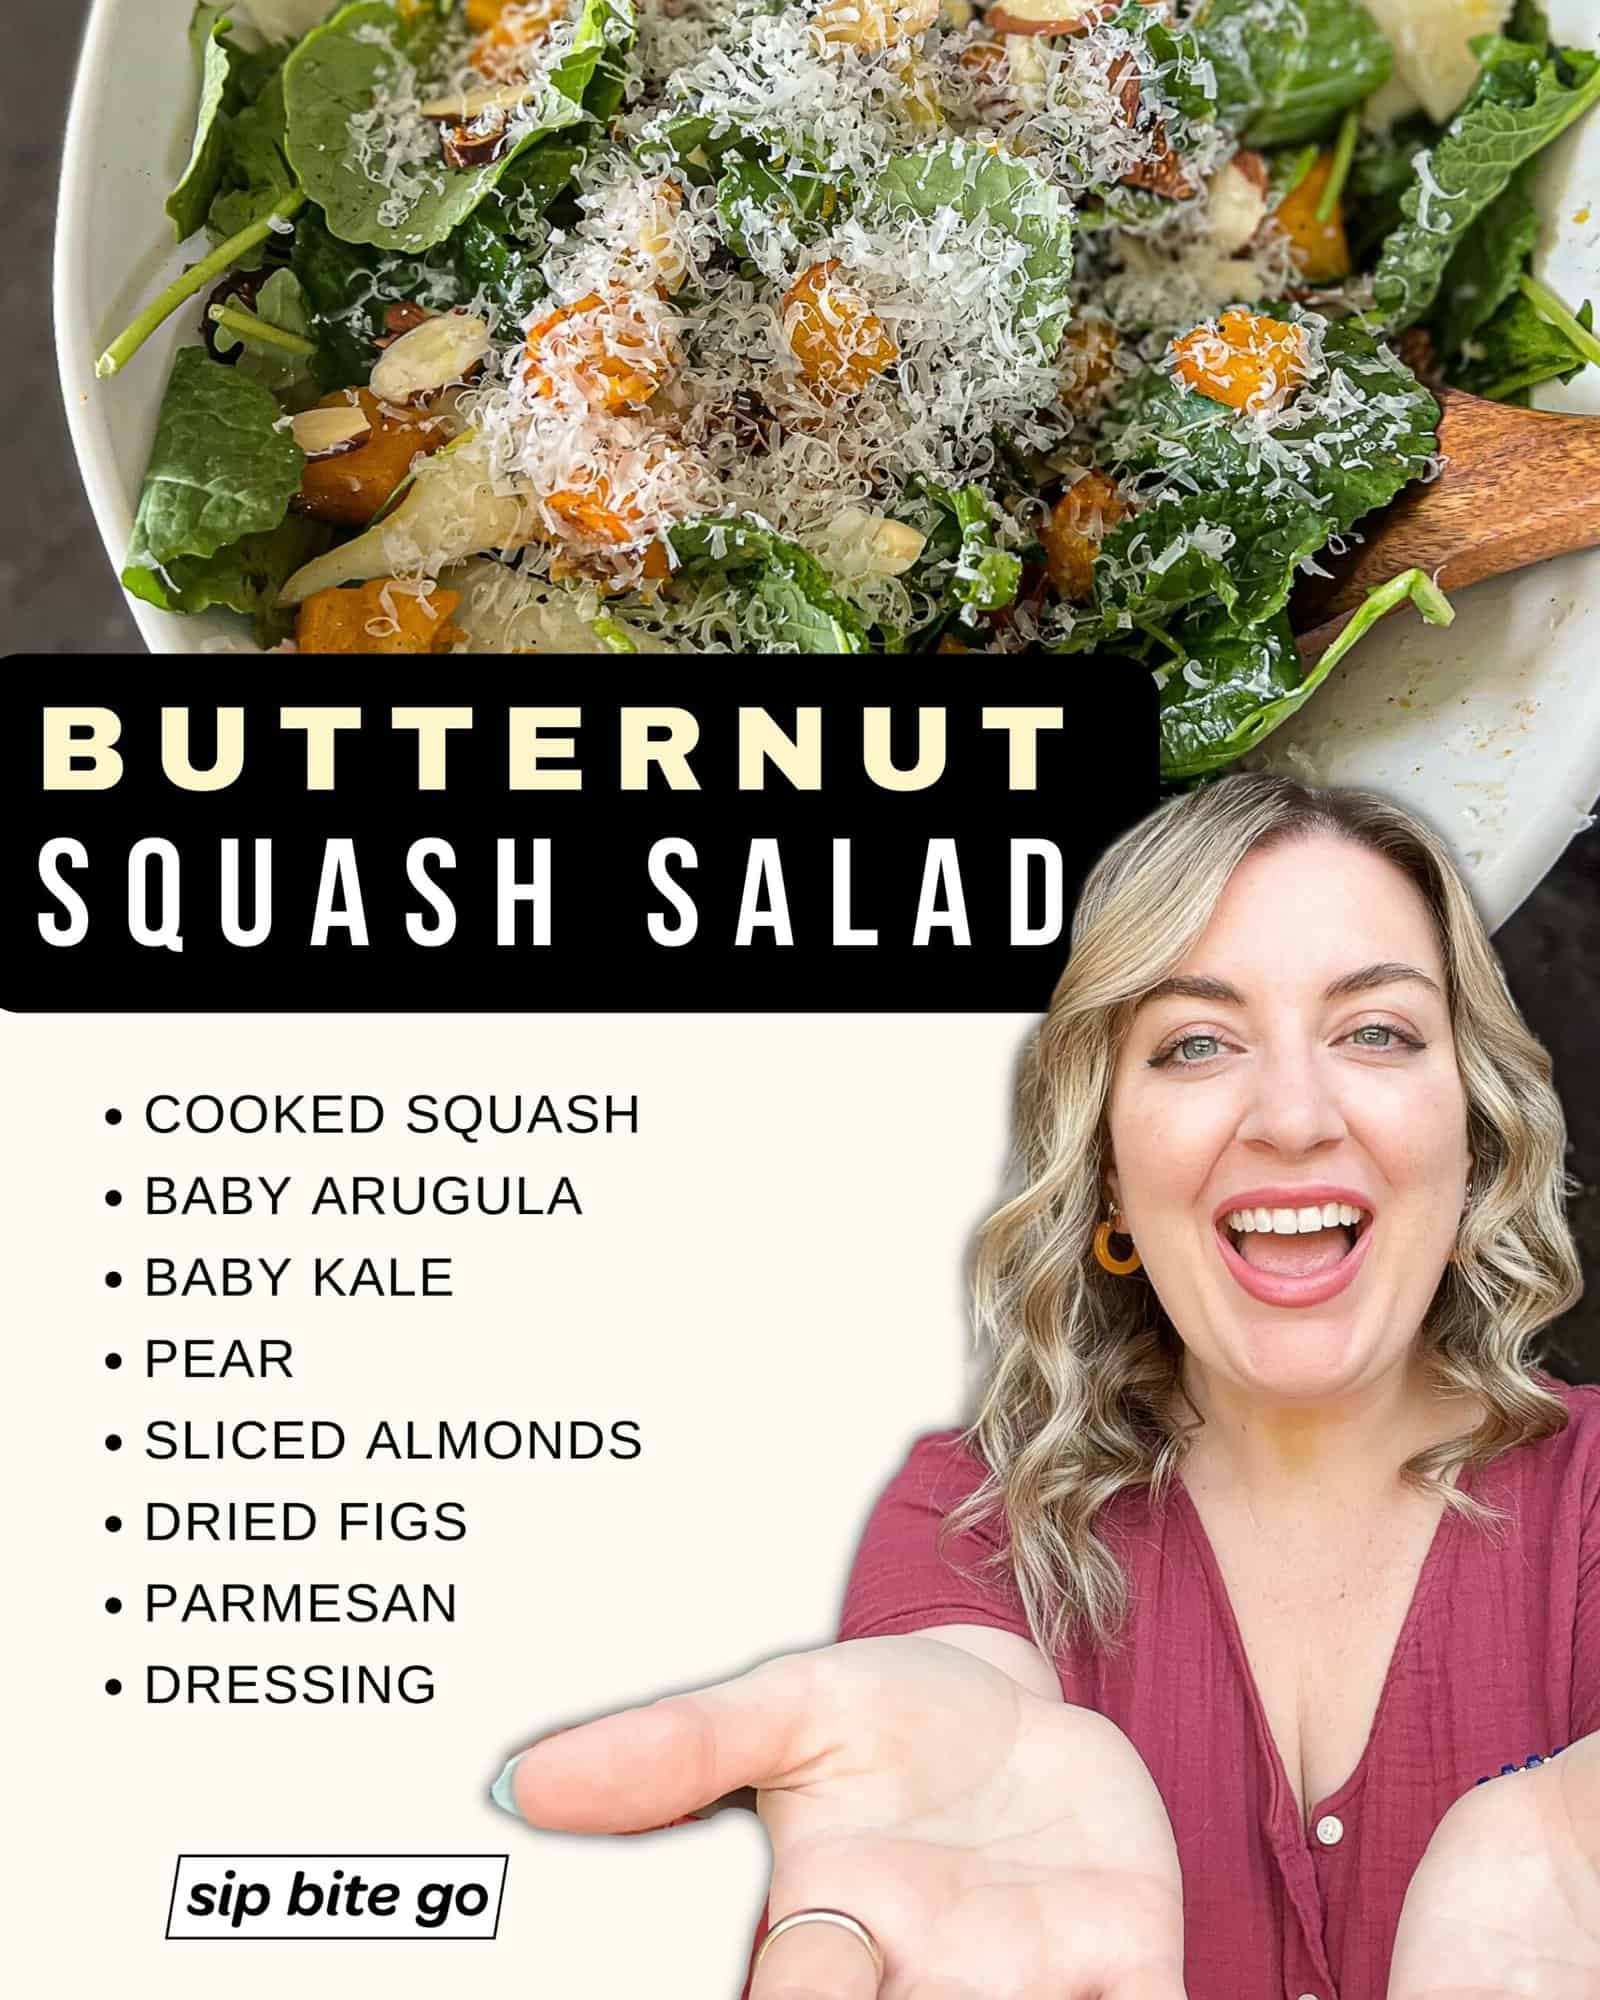 Infographic with ingredients list for making butternut squash salad